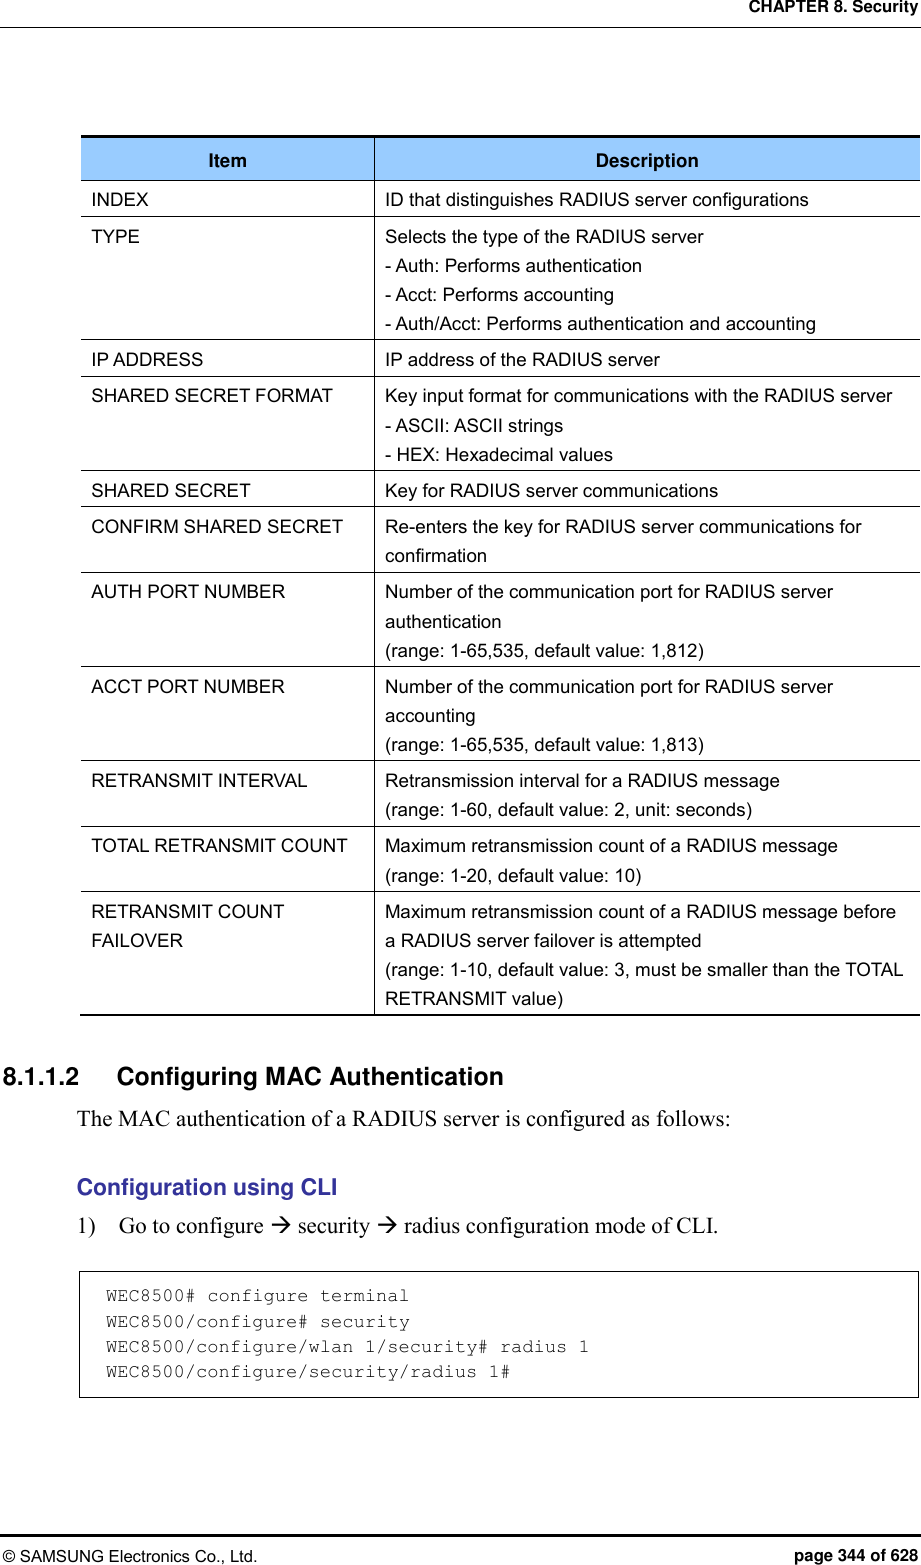 CHAPTER 8. Security © SAMSUNG Electronics Co., Ltd.  page 344 of 628  Item Description INDEX ID that distinguishes RADIUS server configurations TYPE Selects the type of the RADIUS server - Auth: Performs authentication - Acct: Performs accounting - Auth/Acct: Performs authentication and accounting IP ADDRESS IP address of the RADIUS server SHARED SECRET FORMAT Key input format for communications with the RADIUS server - ASCII: ASCII strings - HEX: Hexadecimal values SHARED SECRET Key for RADIUS server communications CONFIRM SHARED SECRET Re-enters the key for RADIUS server communications for confirmation AUTH PORT NUMBER Number of the communication port for RADIUS server authentication   (range: 1-65,535, default value: 1,812) ACCT PORT NUMBER Number of the communication port for RADIUS server accounting (range: 1-65,535, default value: 1,813) RETRANSMIT INTERVAL Retransmission interval for a RADIUS message (range: 1-60, default value: 2, unit: seconds) TOTAL RETRANSMIT COUNT Maximum retransmission count of a RADIUS message (range: 1-20, default value: 10) RETRANSMIT COUNT FAILOVER Maximum retransmission count of a RADIUS message before a RADIUS server failover is attempted (range: 1-10, default value: 3, must be smaller than the TOTAL RETRANSMIT value)  8.1.1.2  Configuring MAC Authentication The MAC authentication of a RADIUS server is configured as follows:  Configuration using CLI 1)    Go to configure  security  radius configuration mode of CLI.  WEC8500# configure terminal WEC8500/configure# security WEC8500/configure/wlan 1/security# radius 1 WEC8500/configure/security/radius 1#  